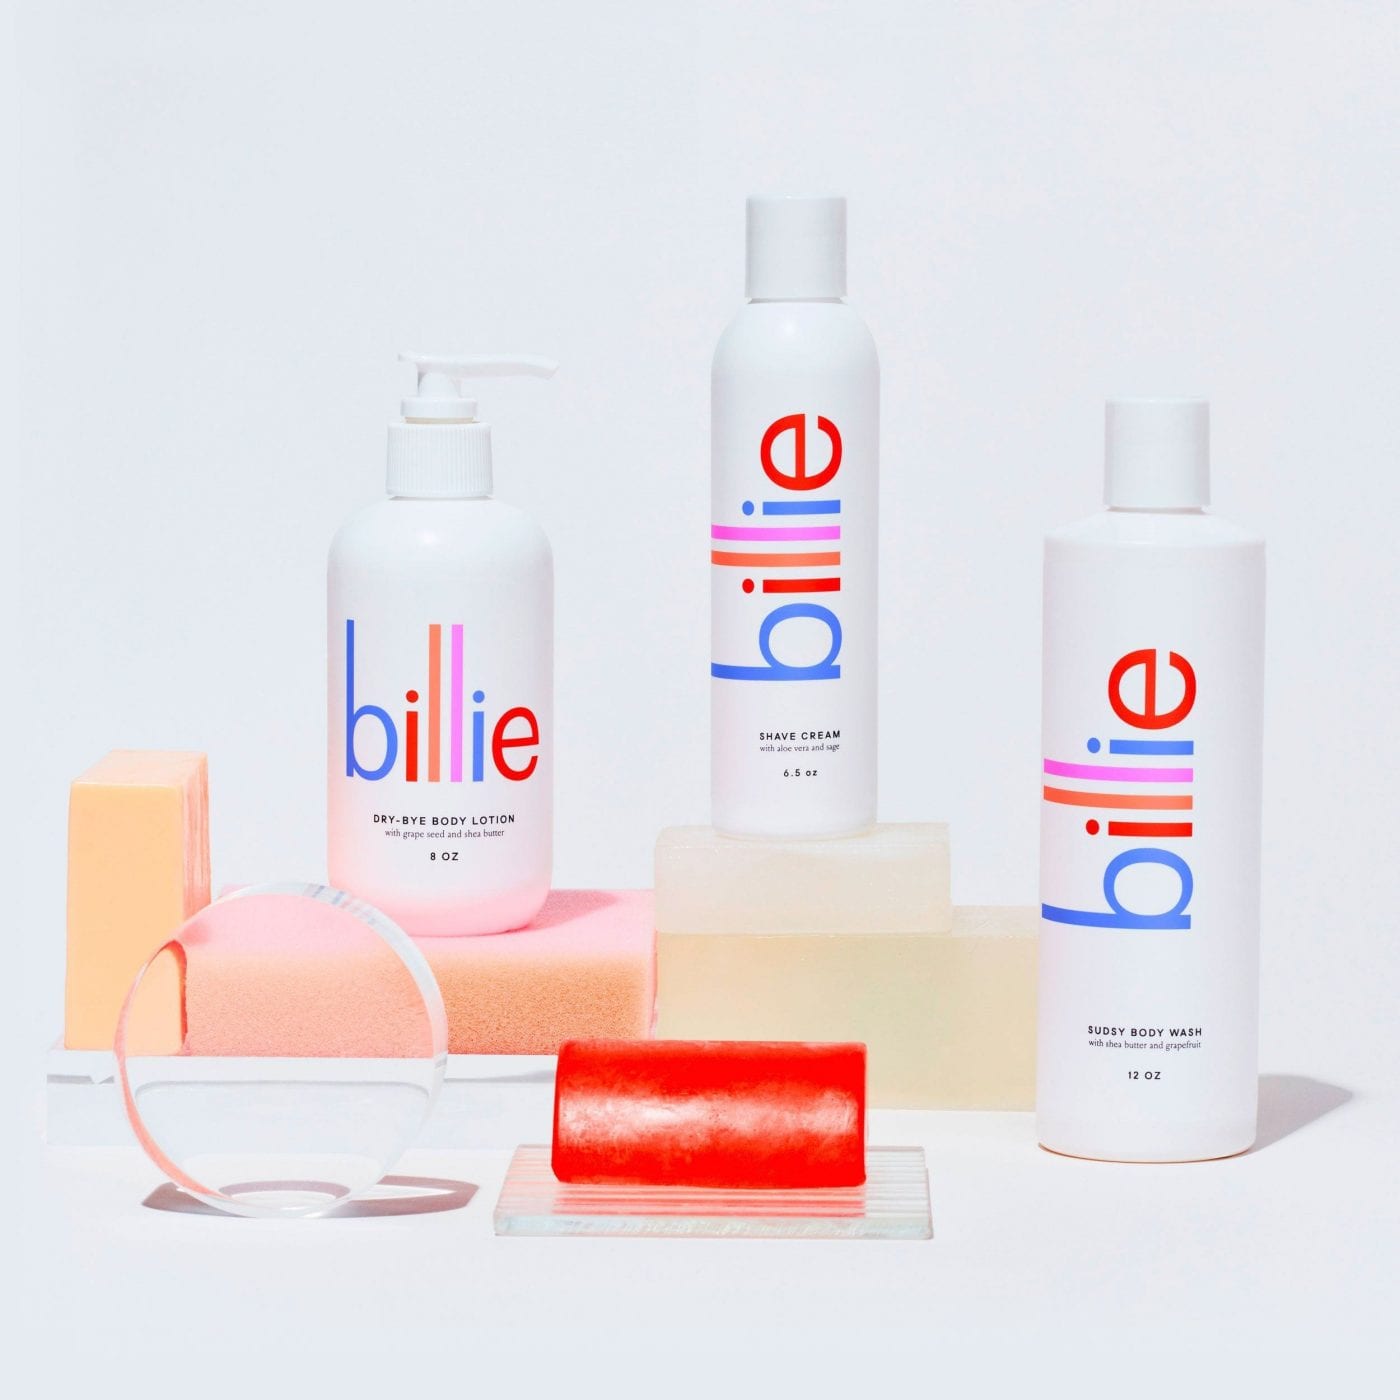 Beauty with a cause: Billie, a female first shaving company donates towards helping pregnancy and childbirth safe for women.